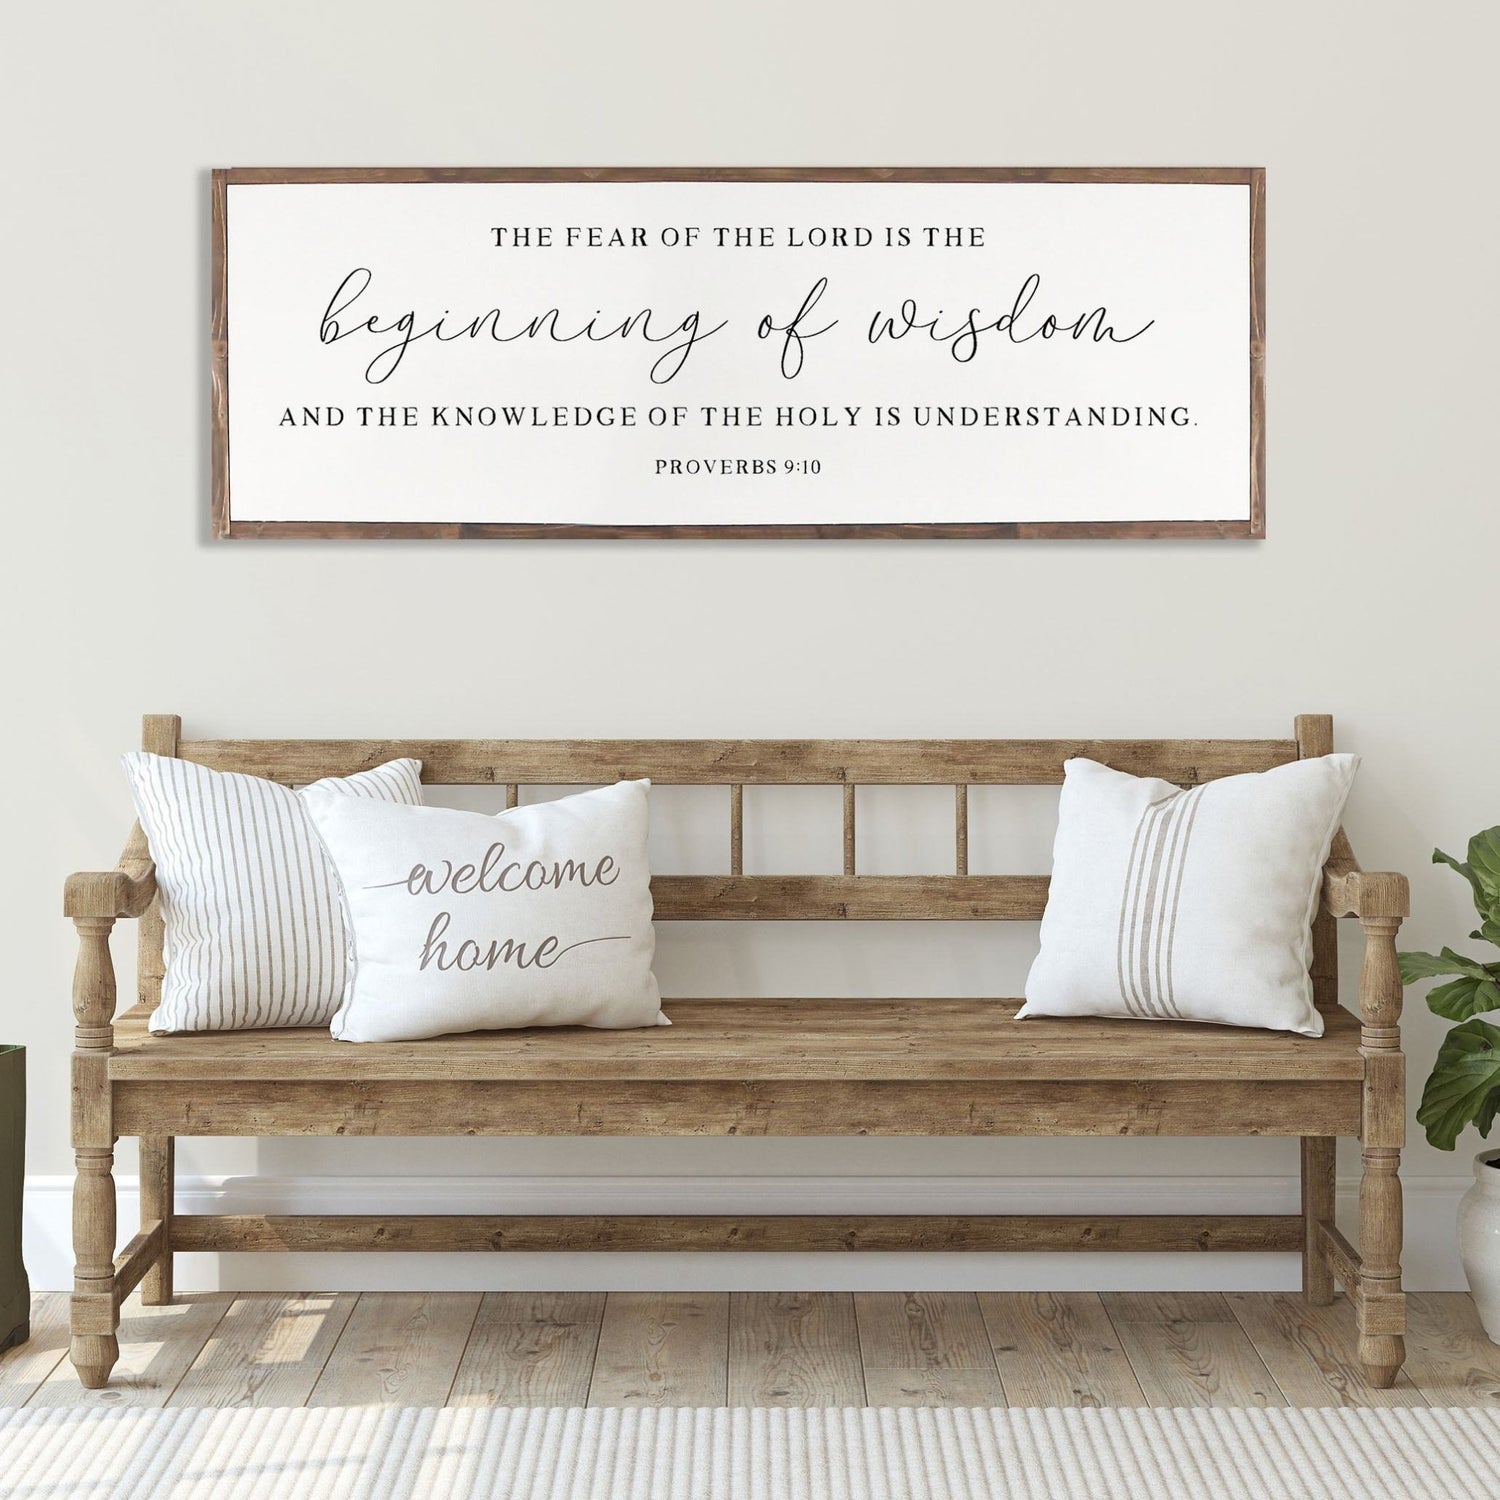 The Fear of the Lord is the Beginning of Wisdom Wood Sign, Hand Painted, Rustic SCRIPTURE WOOD SIGN - Proverbs 9:10 - Forever Written